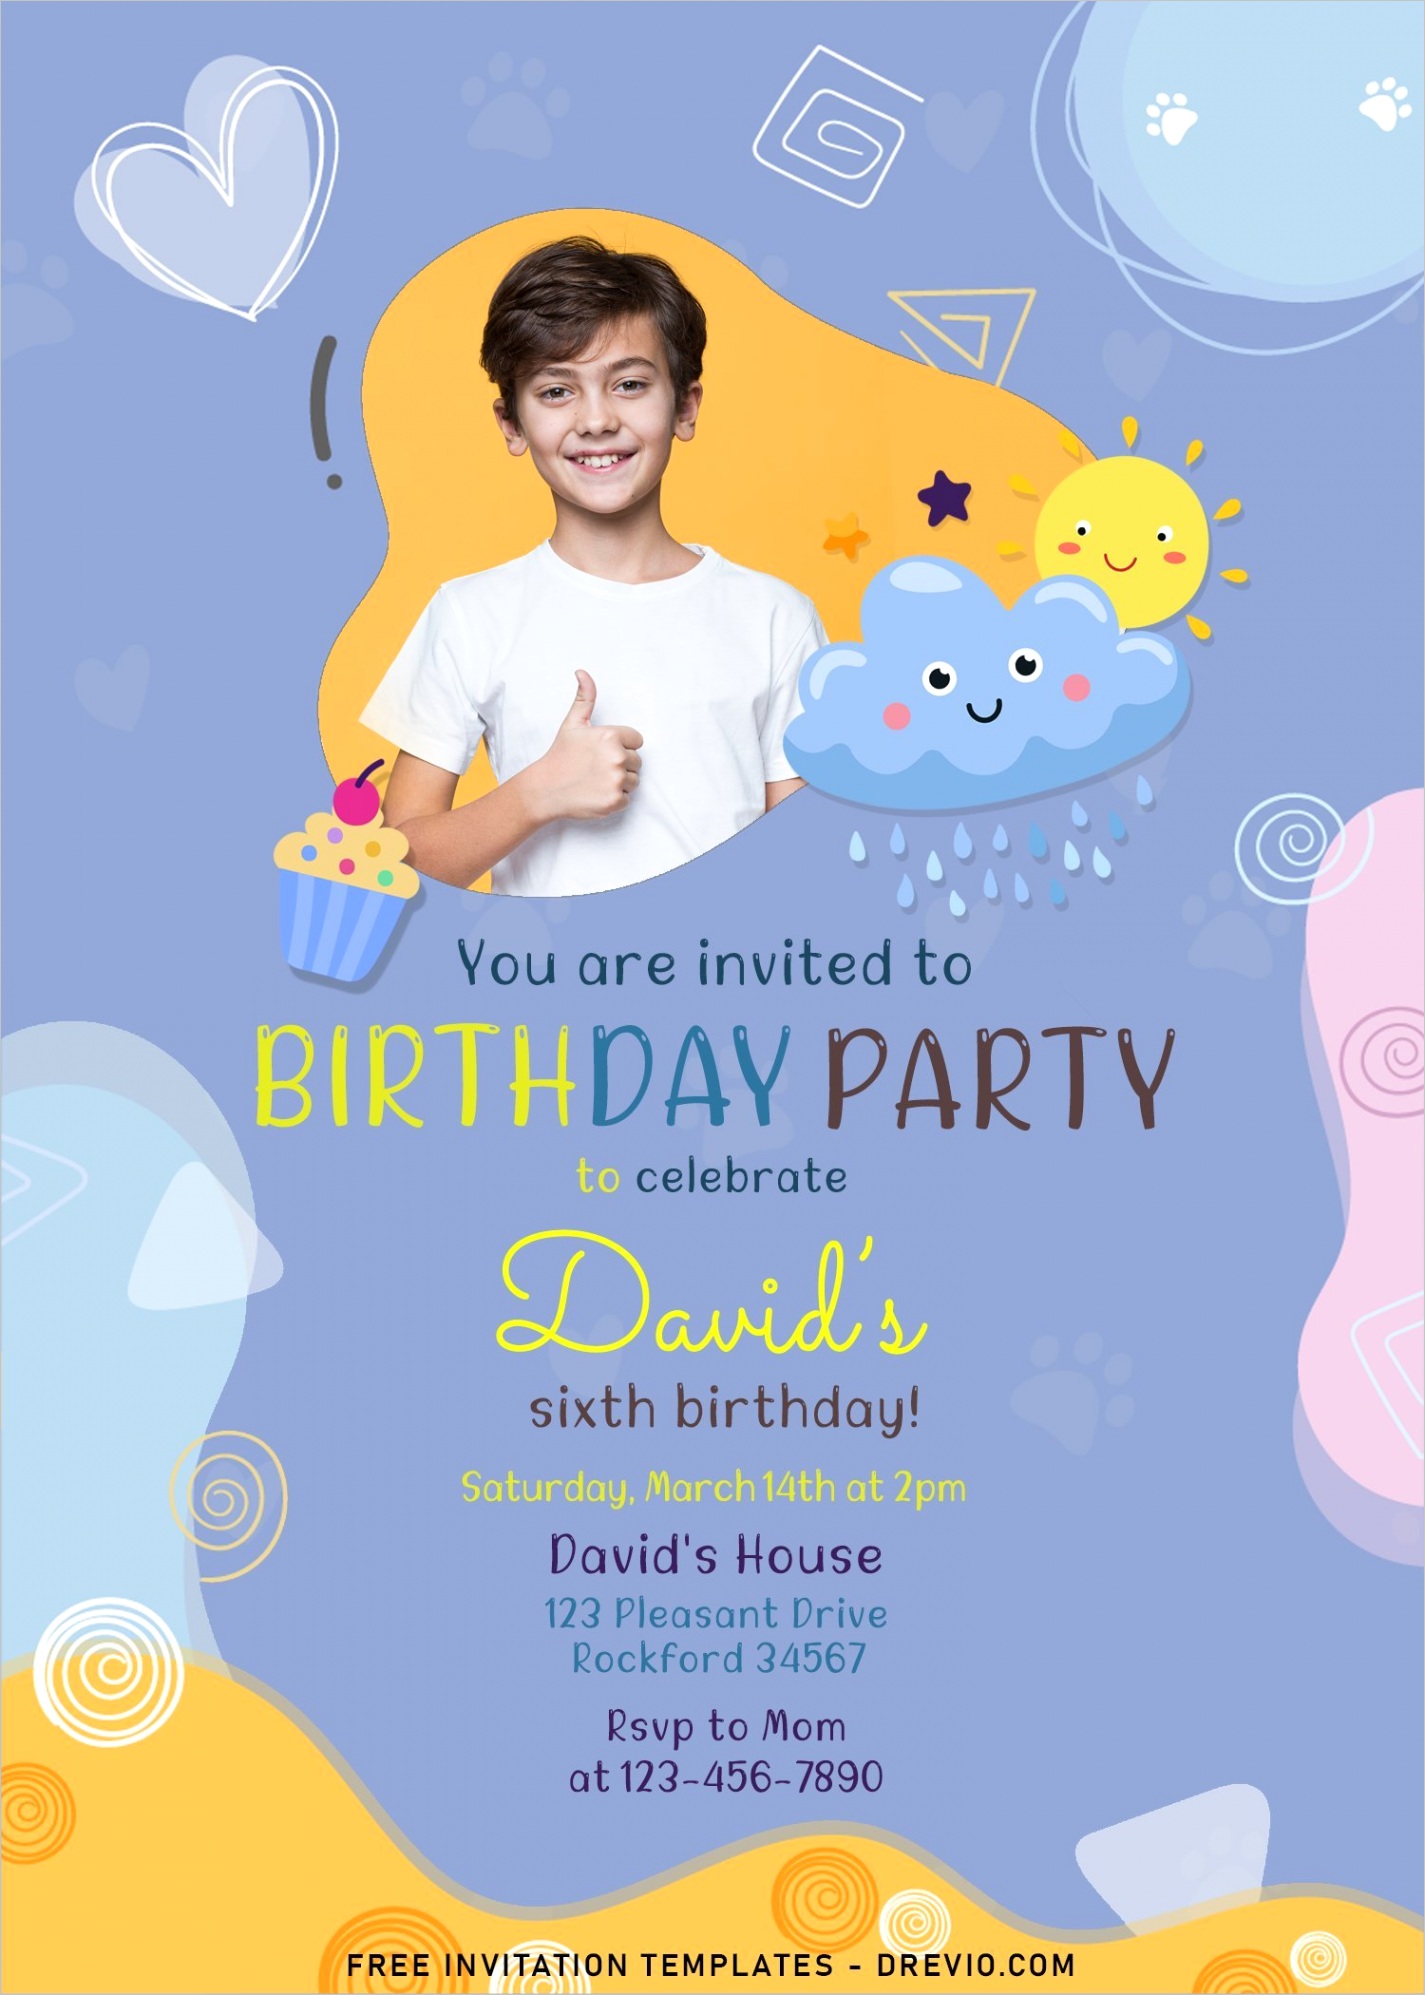 8 colorful hand drawn birthday invitation templates for your kids birthday